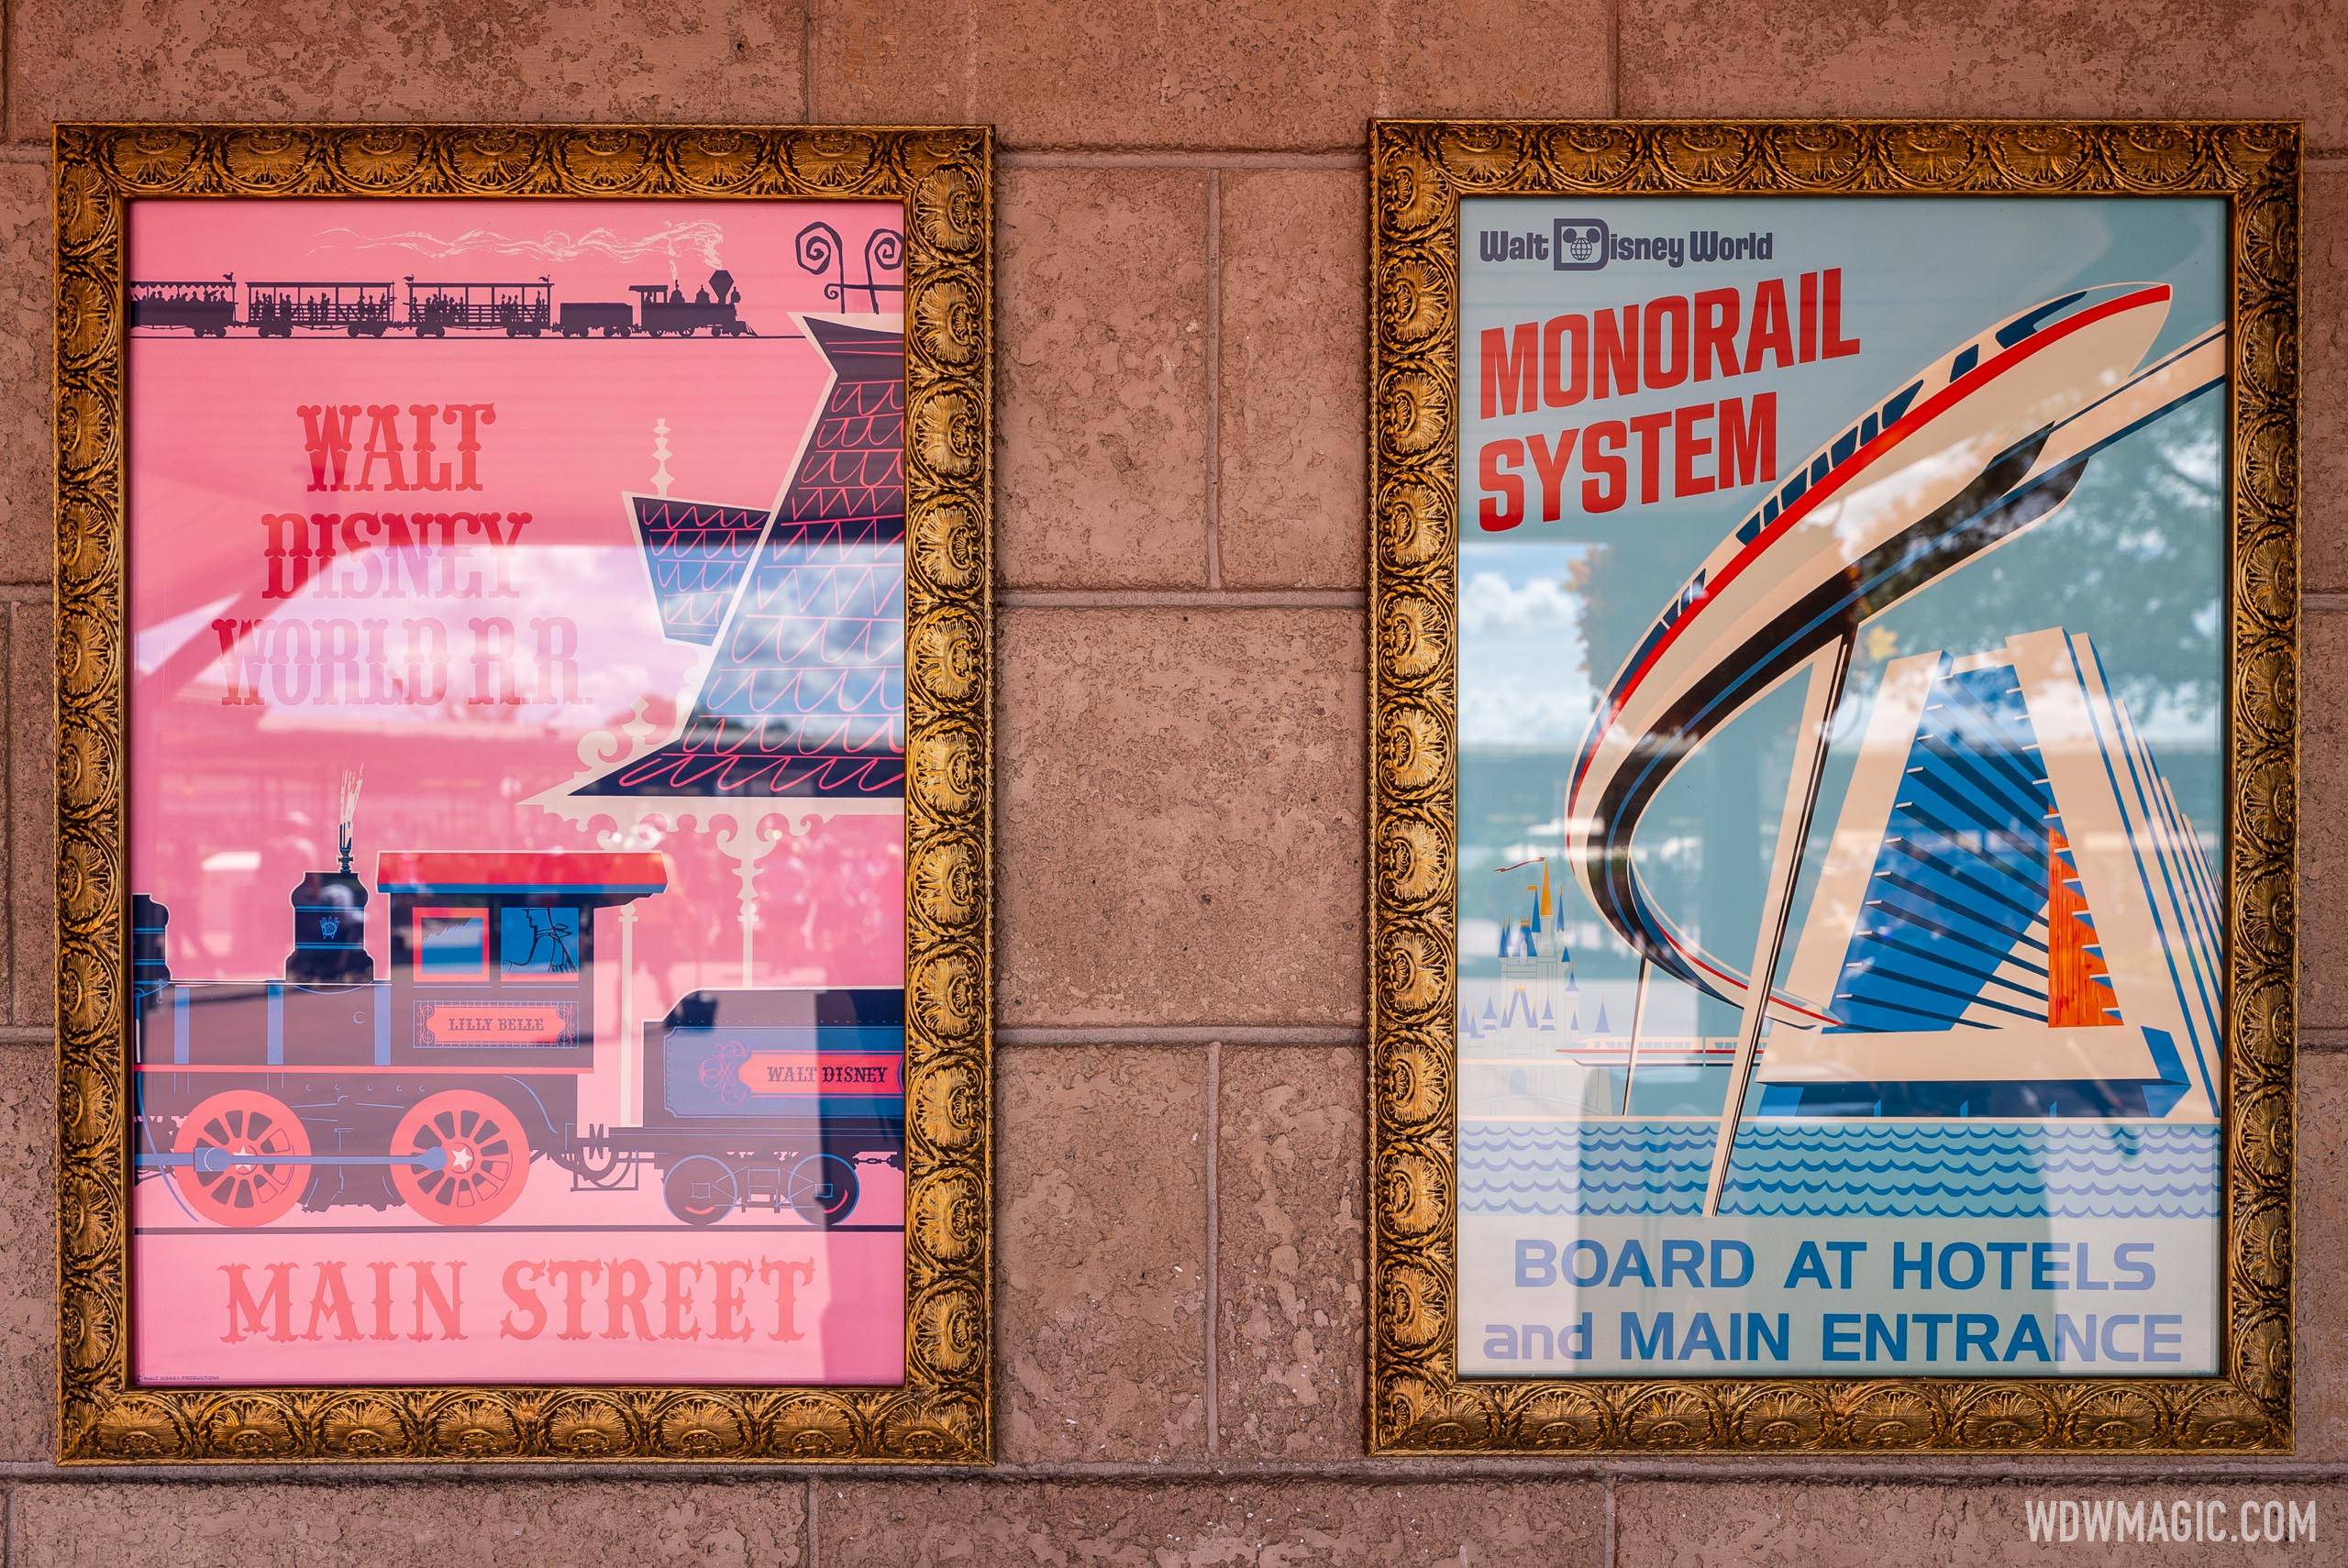 Magic Kingdom vintage attraction poster - Walt Disney World R.R. and Monorail System